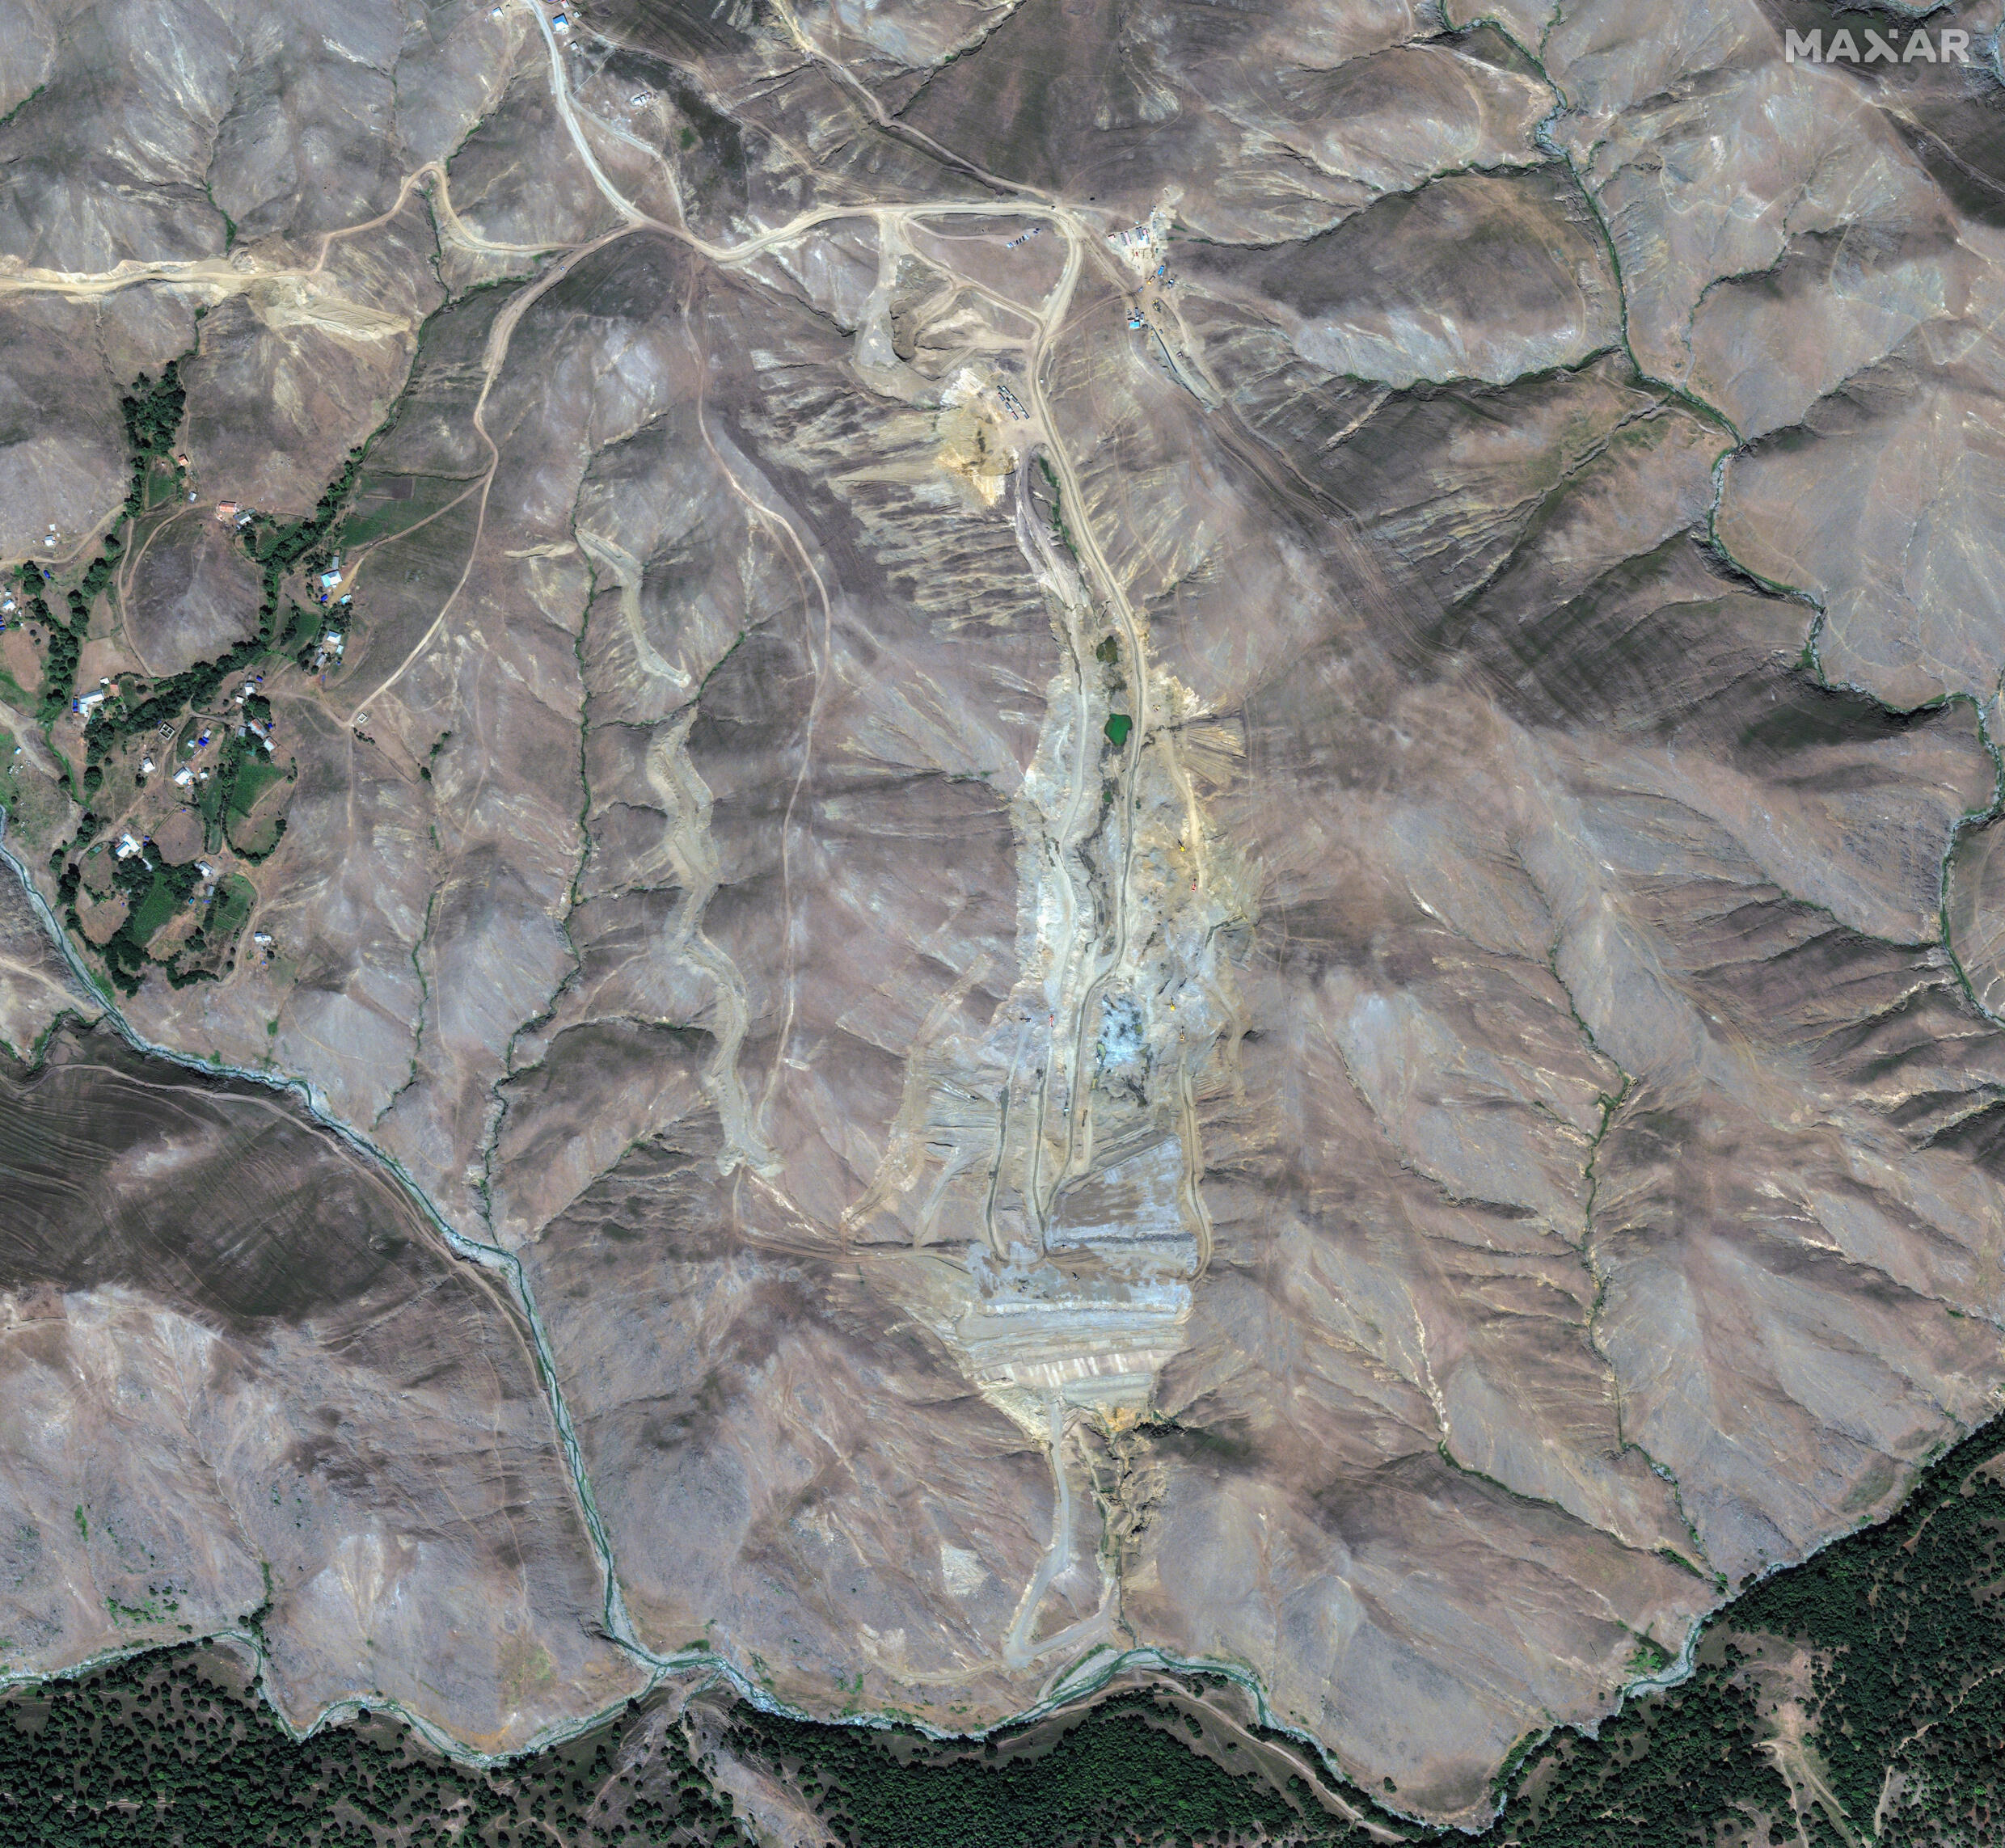 This satellite image from 2012 show the location where a waste-containment reservoir known as a tailings pond will later be built at the Gedabek mine in Azerbaijan.